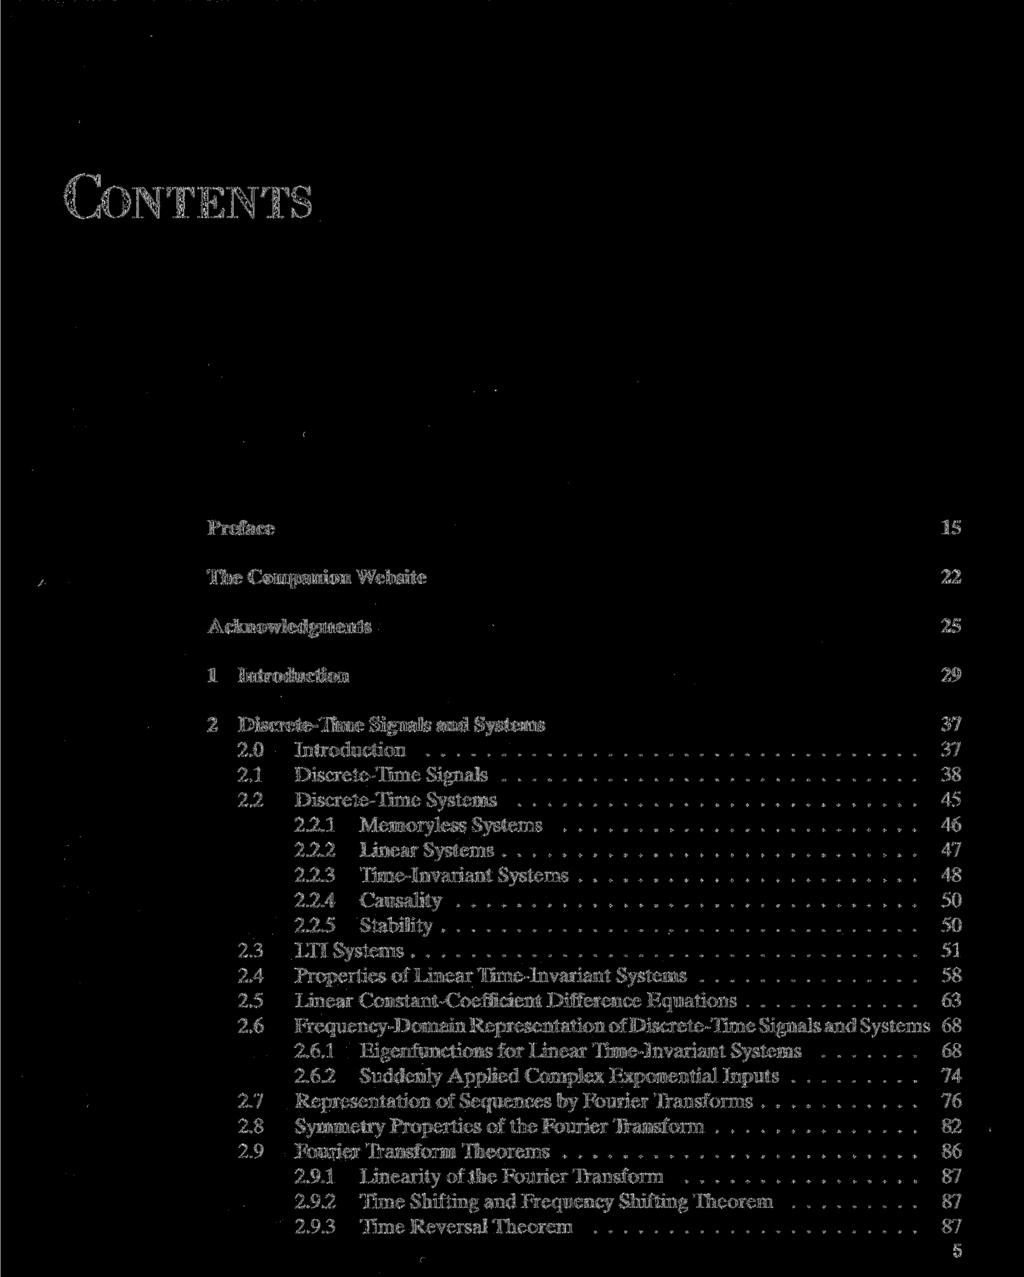 CONTENTS Preface 15 The Companion Website 22 Acknowledgments 25 1 Introduction 29 2 Discrete-Time Signals and Systems 37 2.0 Introduction 37 2.1 Discrete-Time Signals 38 2.